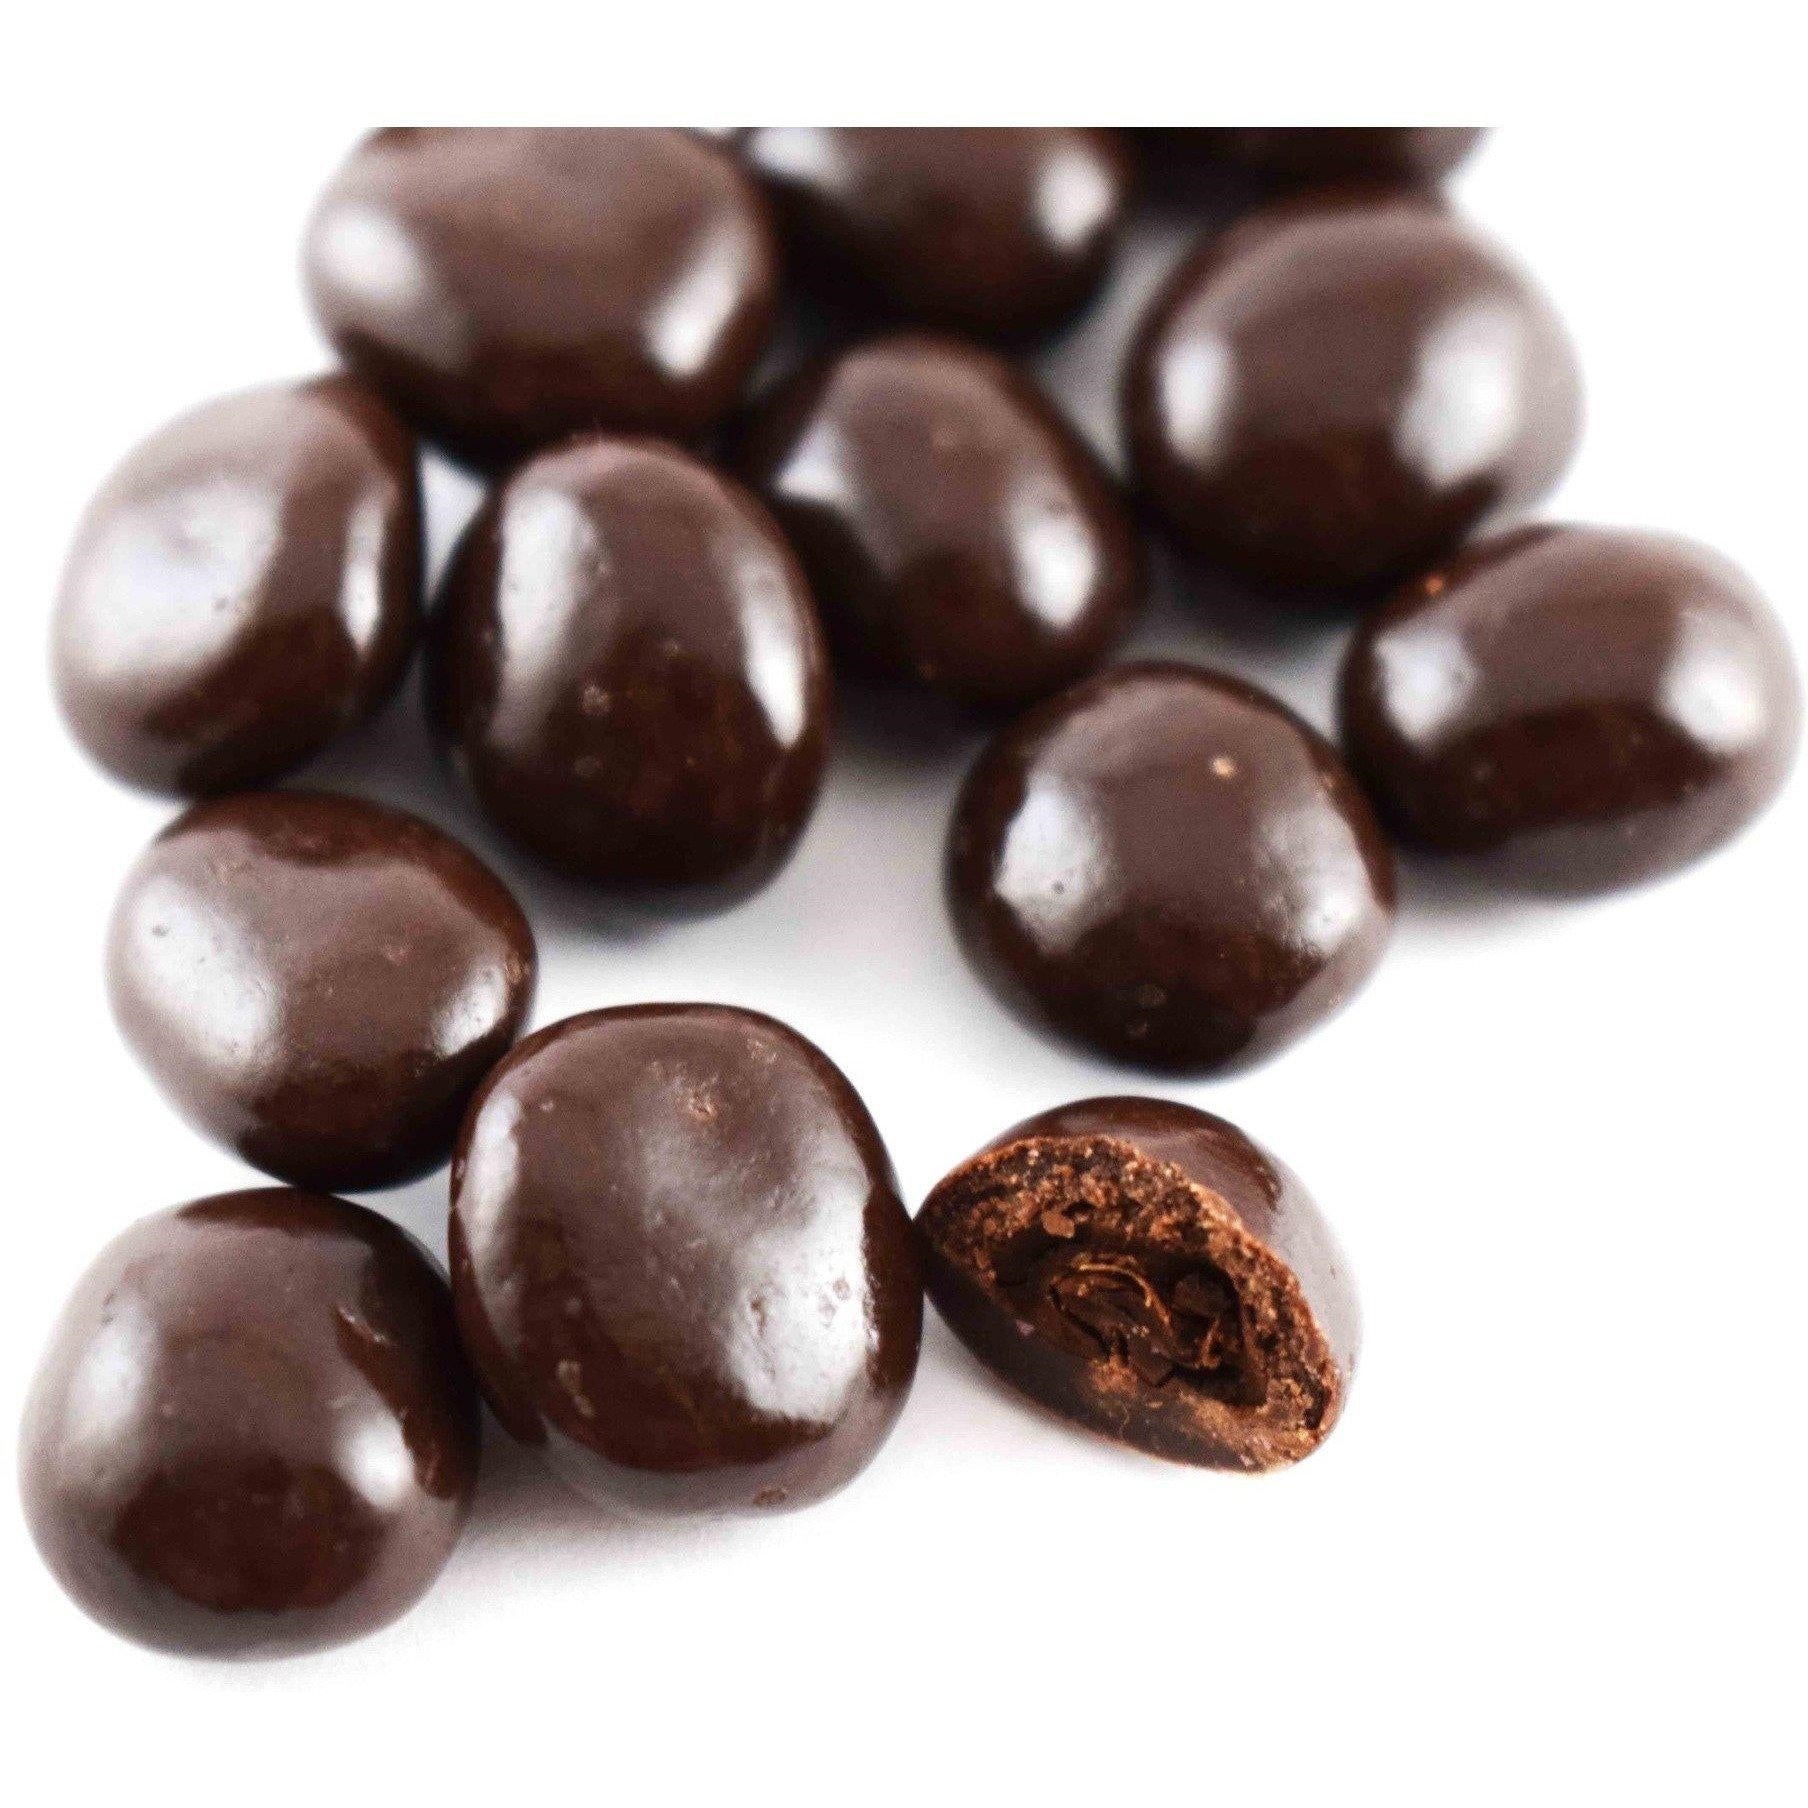 CHOC COVERED COFFEE BEANS 1KG